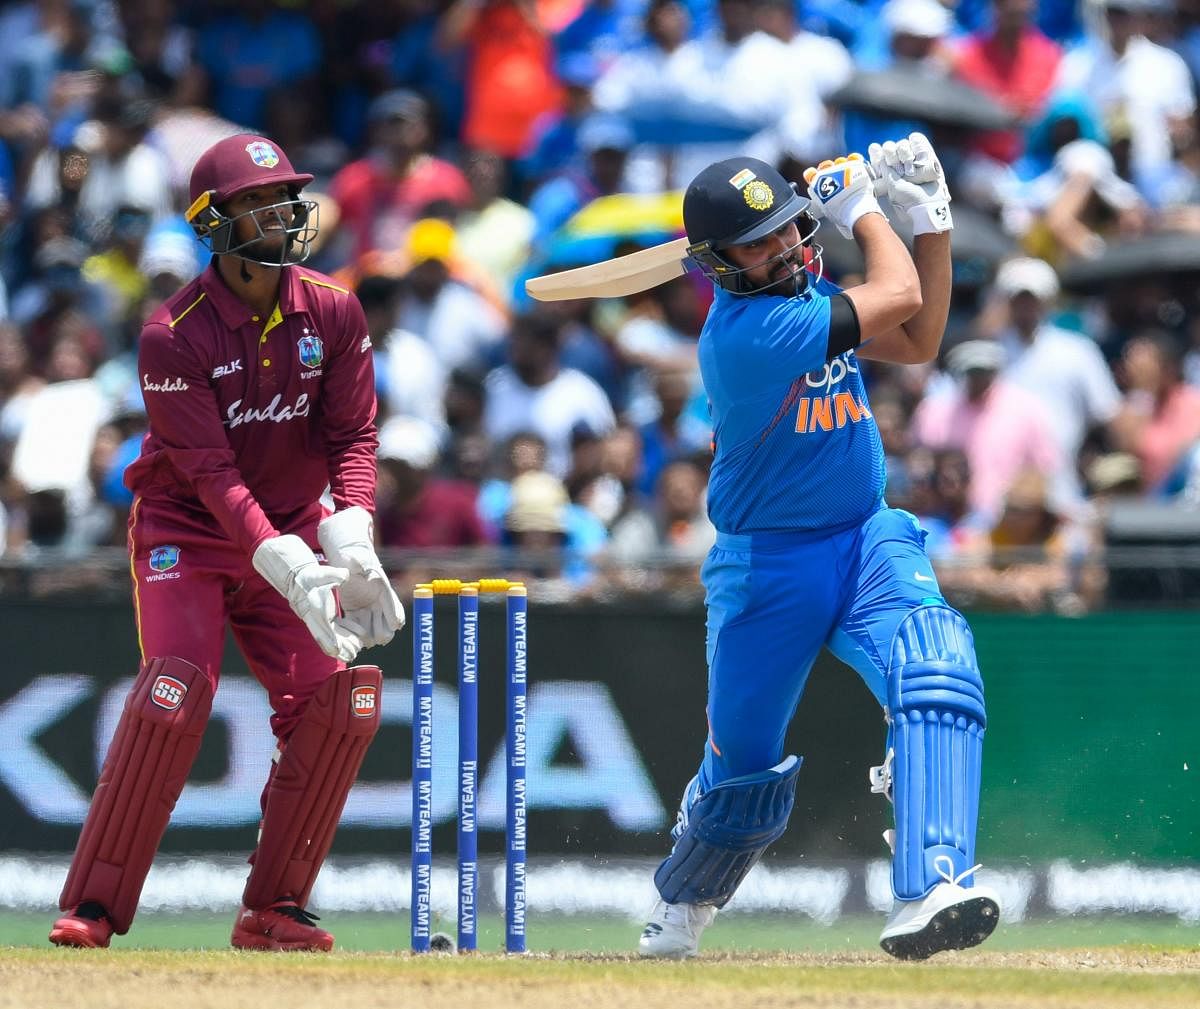 Rohit Sharma (R) of India hits 4 as Nicholas Pooran (L) of West Indies looks on during the 1st T20i match between West Indies and India at Central Broward Regional Park Stadium in Fort Lauderdale, Florida, on August 3, 2019. (Photo by Randy Brooks / AFP)